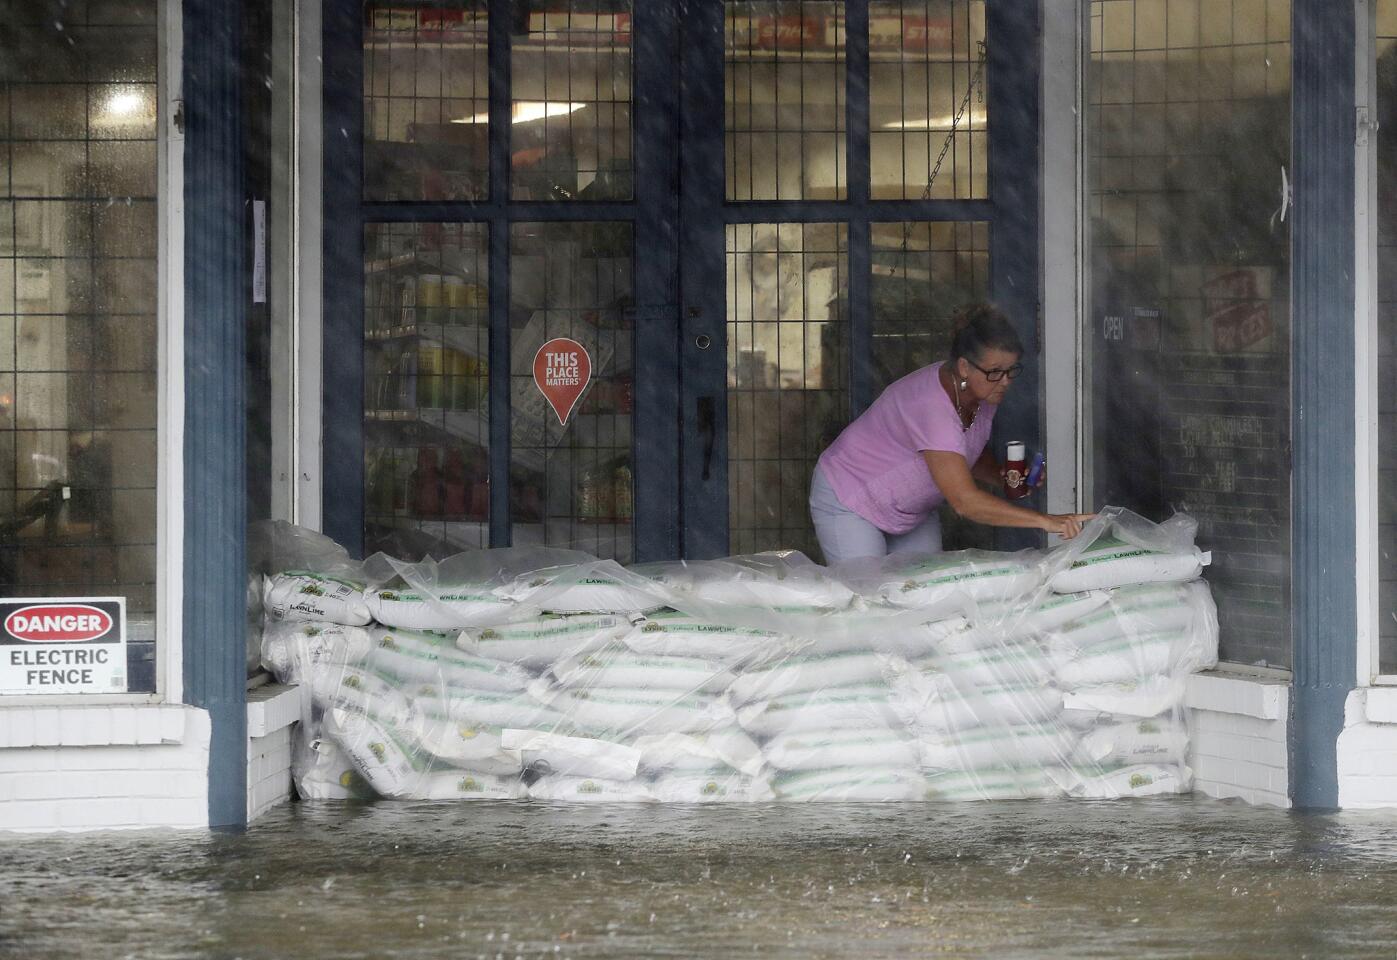 Debbie Tait checks on sand bags in the entrance to her hardware store as the street floods with water from Hurricane Matthew in downtown Brunswick, Ga., on Oct. 7, 2016.